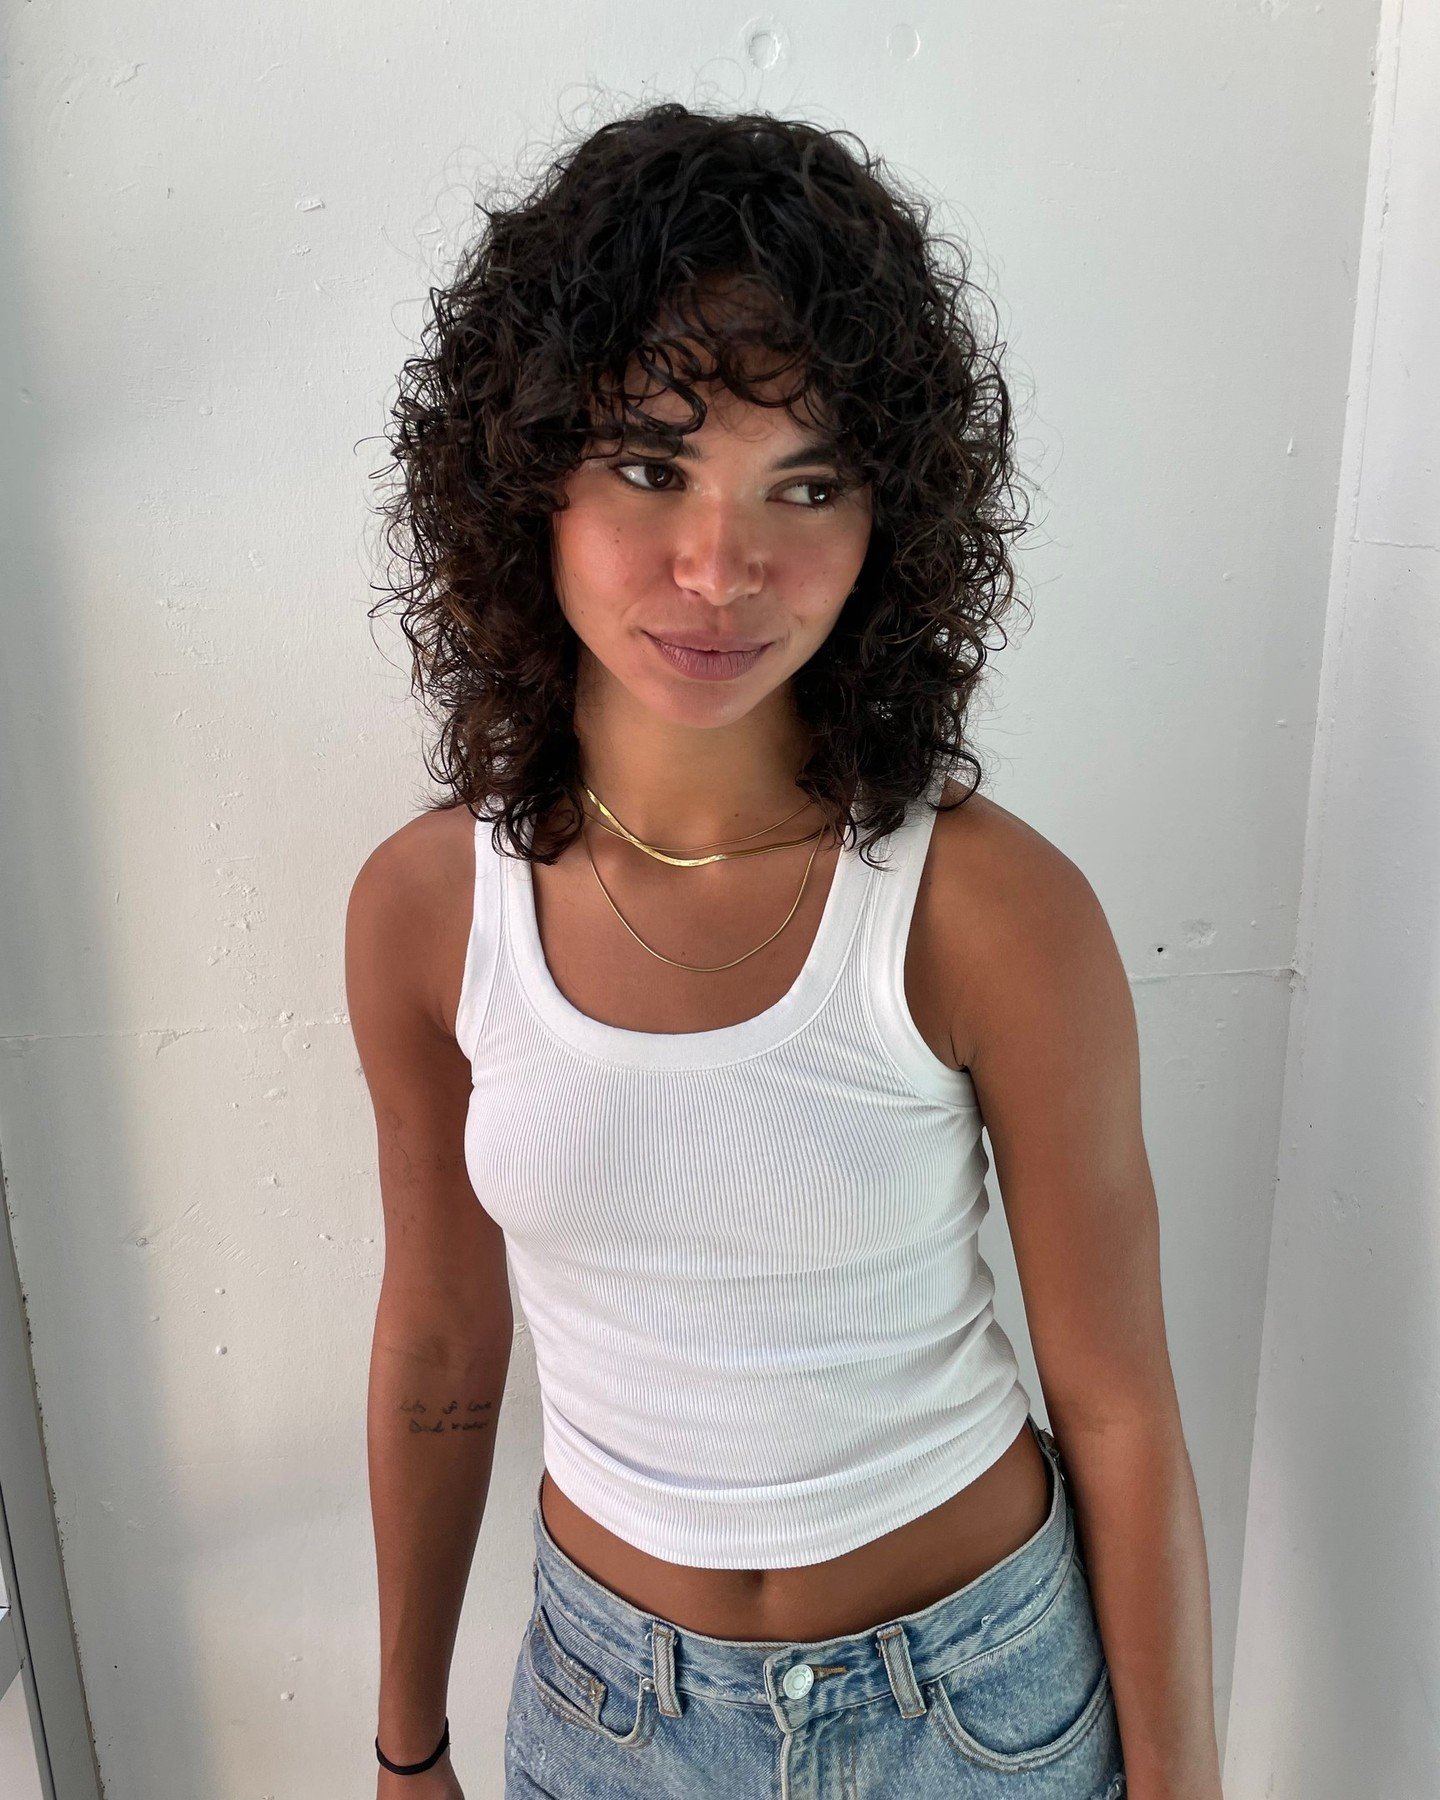 shaggy cut on natural curly hair 🌀⁠
swipe &rarr; for more ⁠
⁠
For appointments:⁠
💻 Book online (link in bio)⁠
🕙 Open Tuesday to Saturday at George St salon. ⁠
📍George Street Salon 📞0285902119⁠
Shop 5, 591 George Street, Sydney⁠
⁠
USFIN ATELIER p